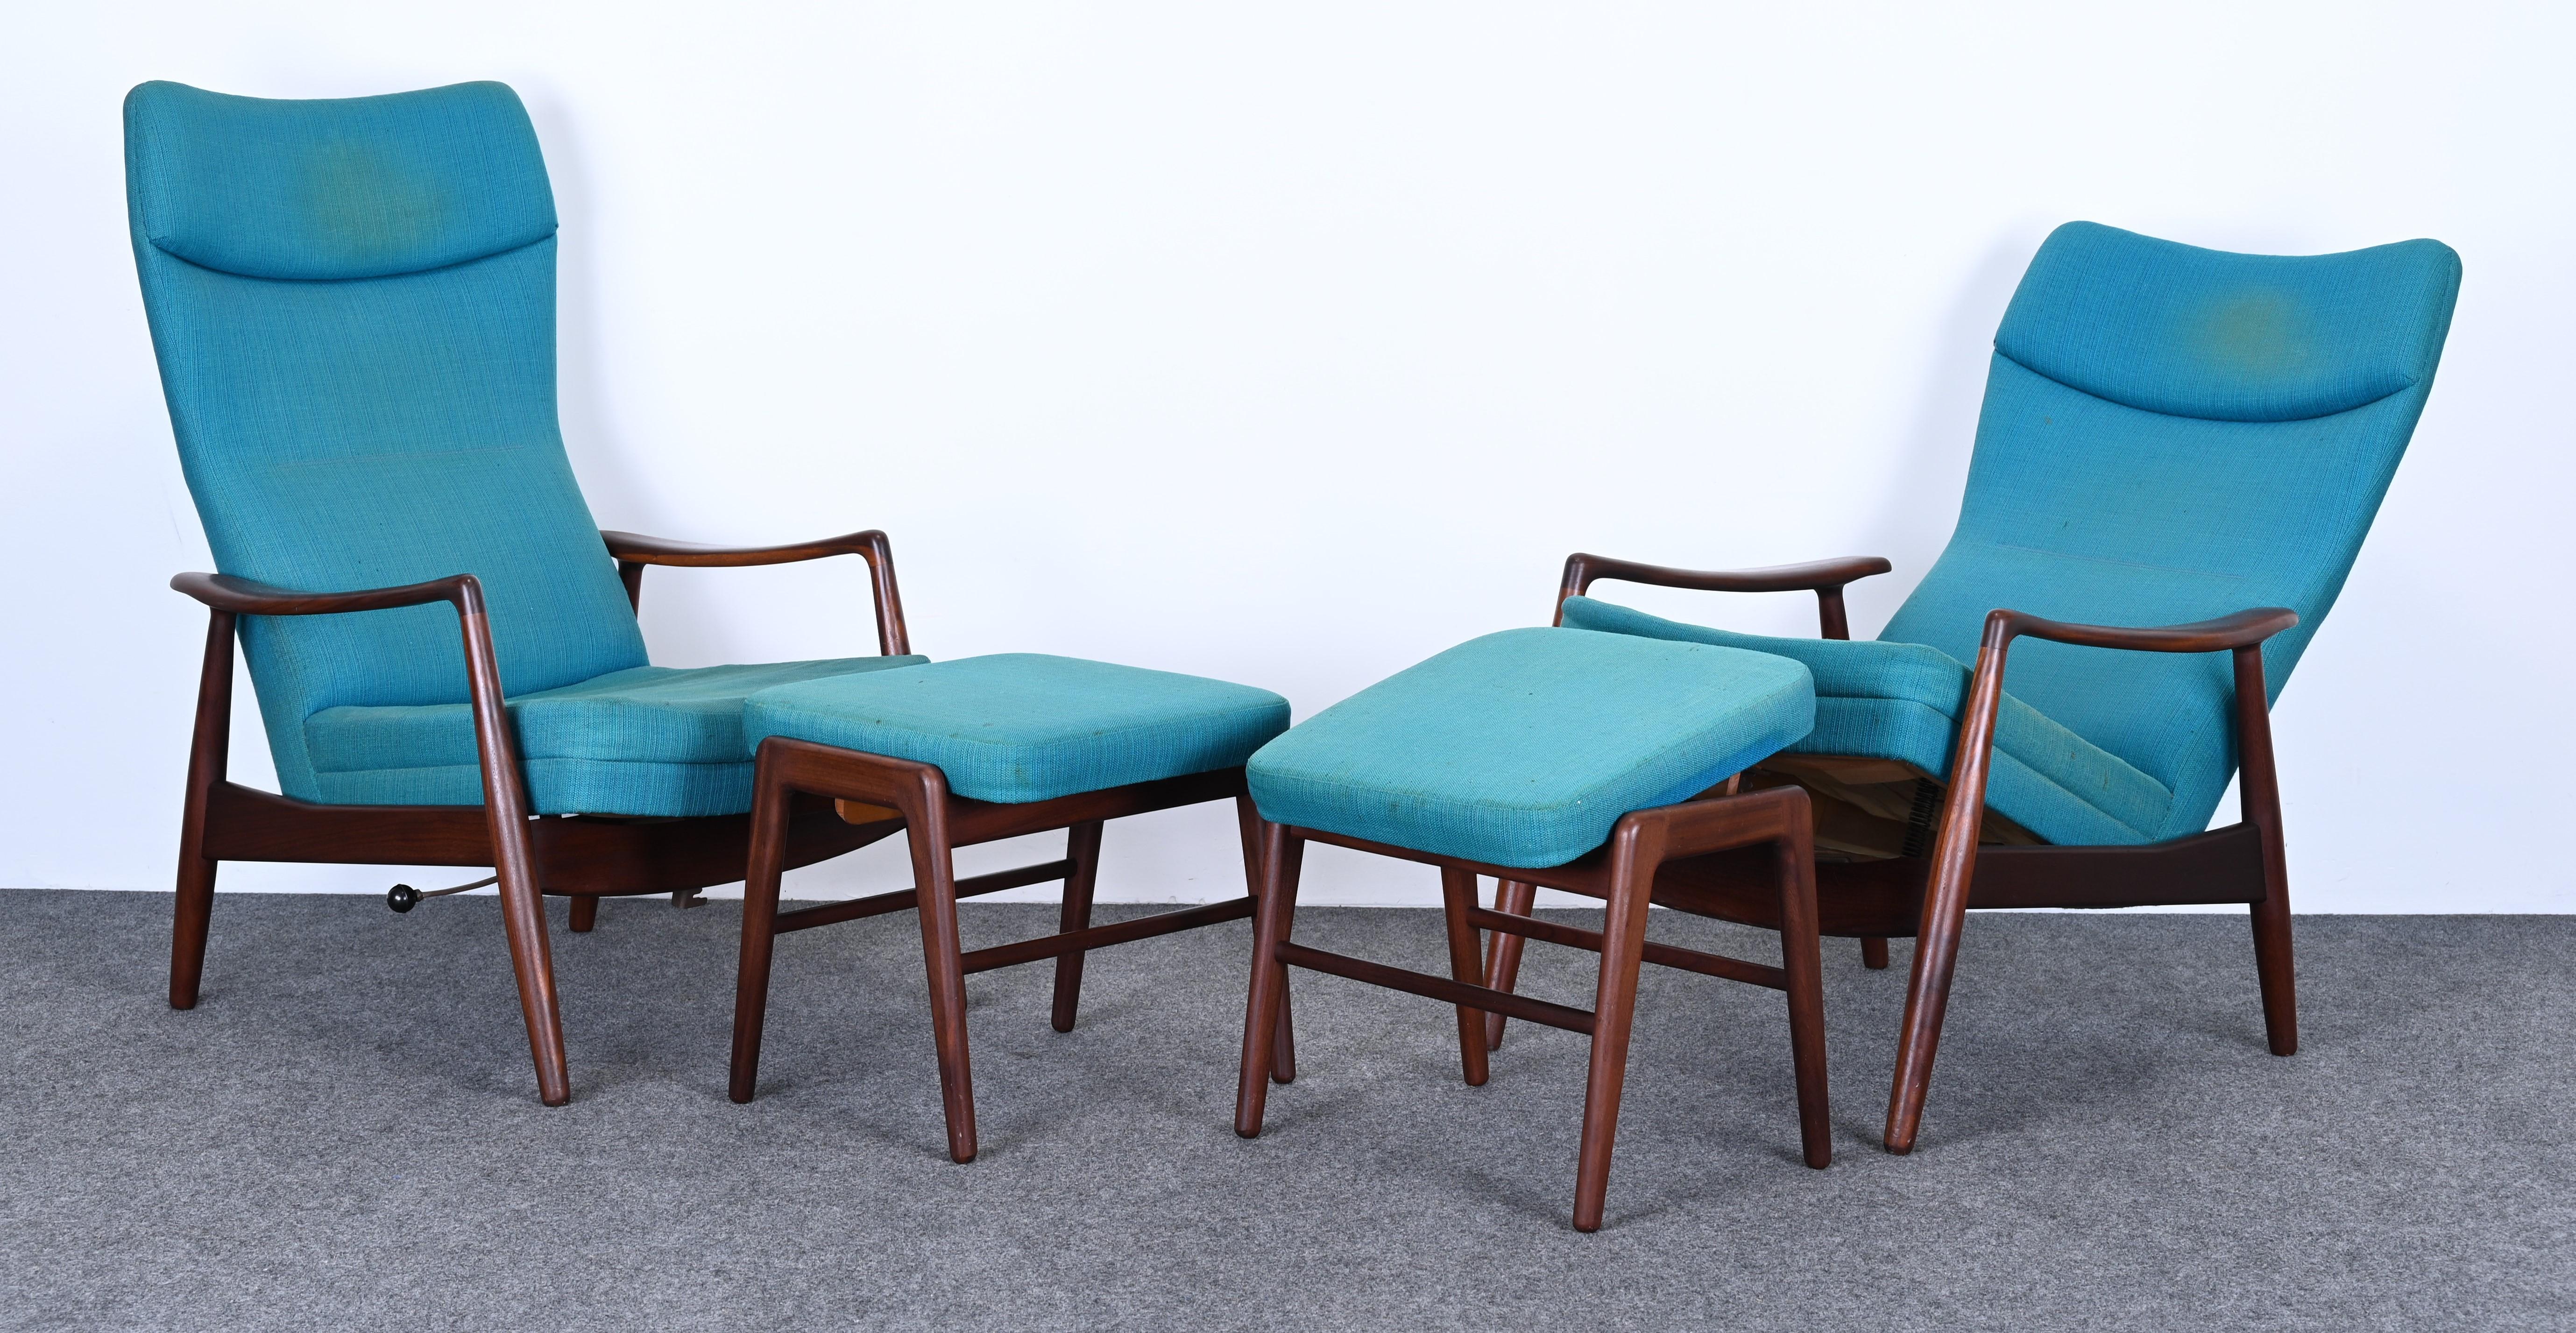 A Mid-Century Modern pair of reclining lounge chairs and ottomans for TOVE, Denmark. The chairs and ottomans recline and tilt. They would look great in a Mid Century Modern or contemporary interior. The teak wood is in very good condition. The